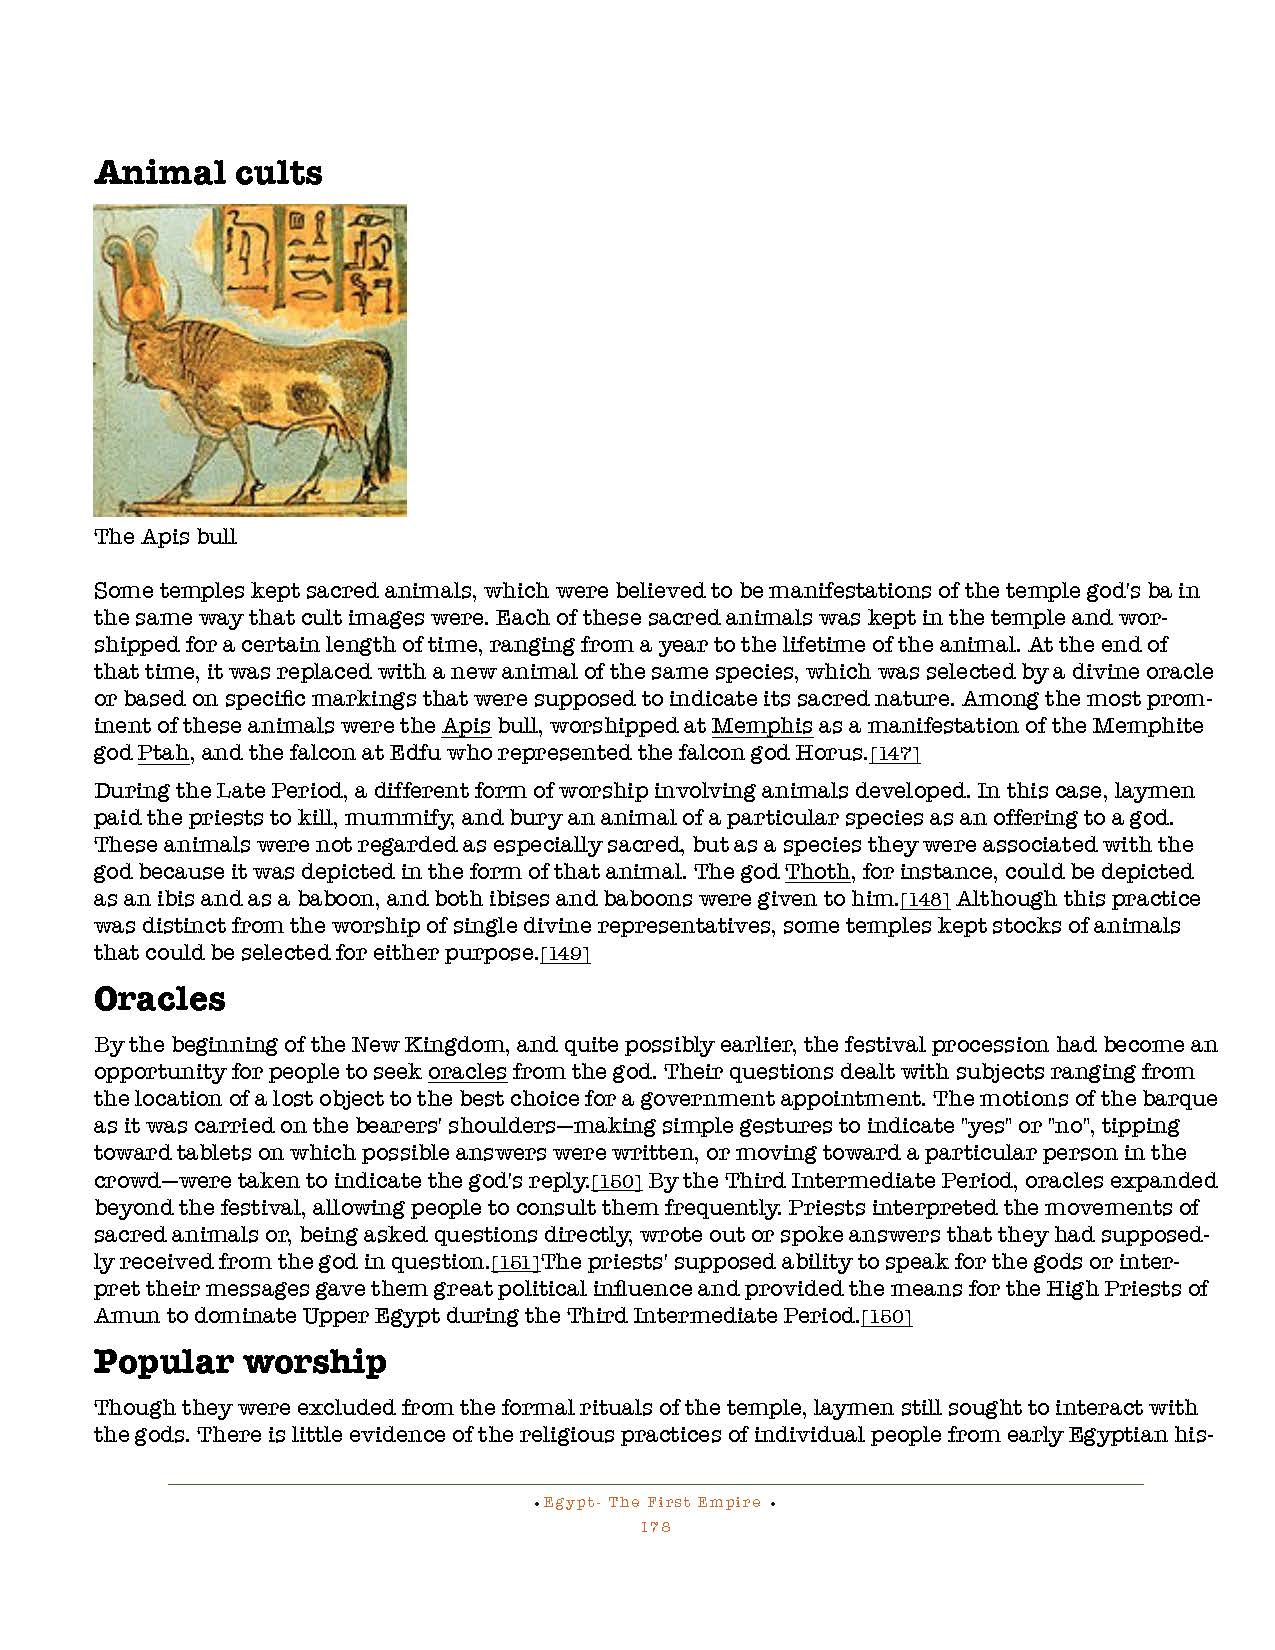 HOCE- Egypt  (First Empire) Notes_Page_178.jpg